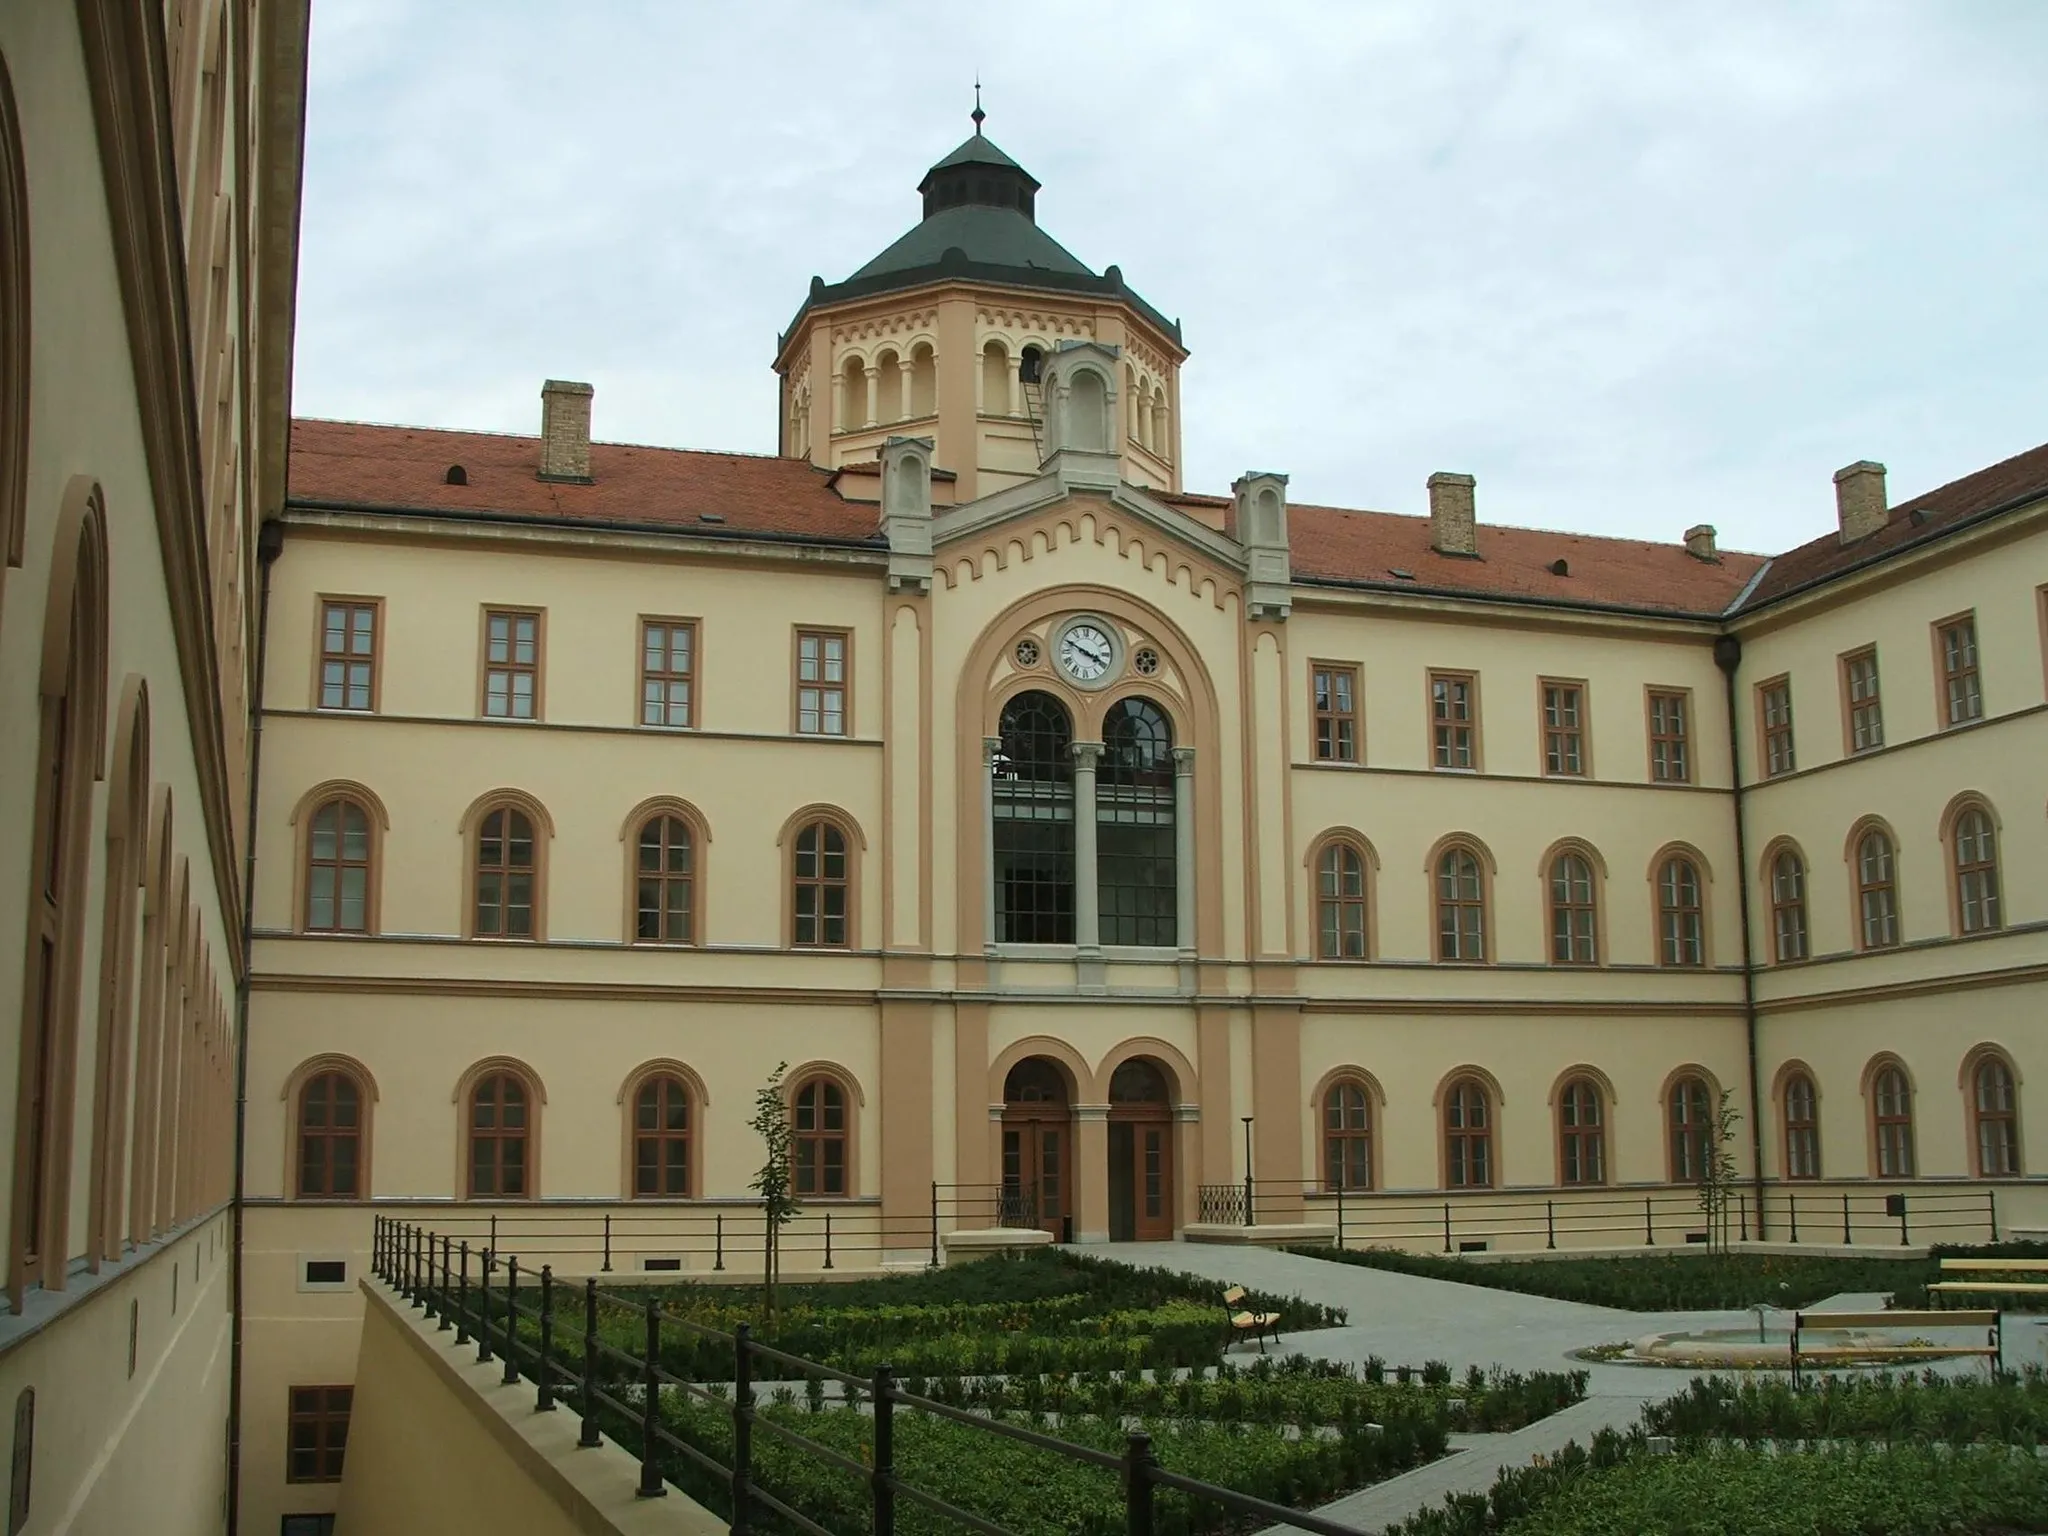 Photo showing: The "Old seminary" in Esztergom, Hungary